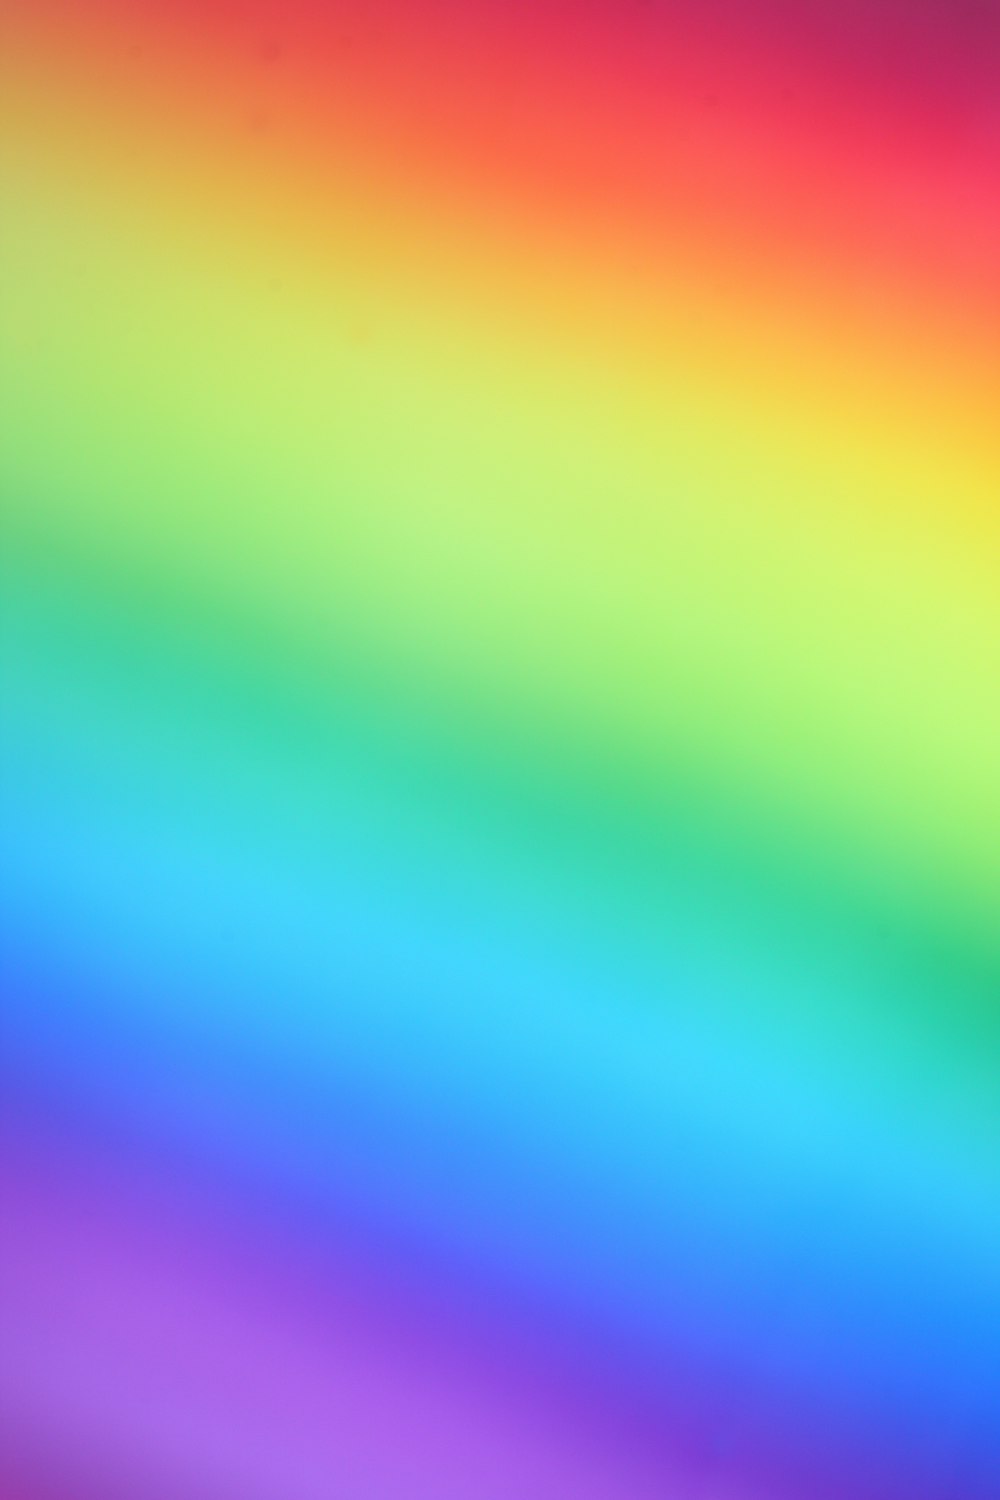 Rainbow Gradient Pictures | Download Free Images on Unsplash